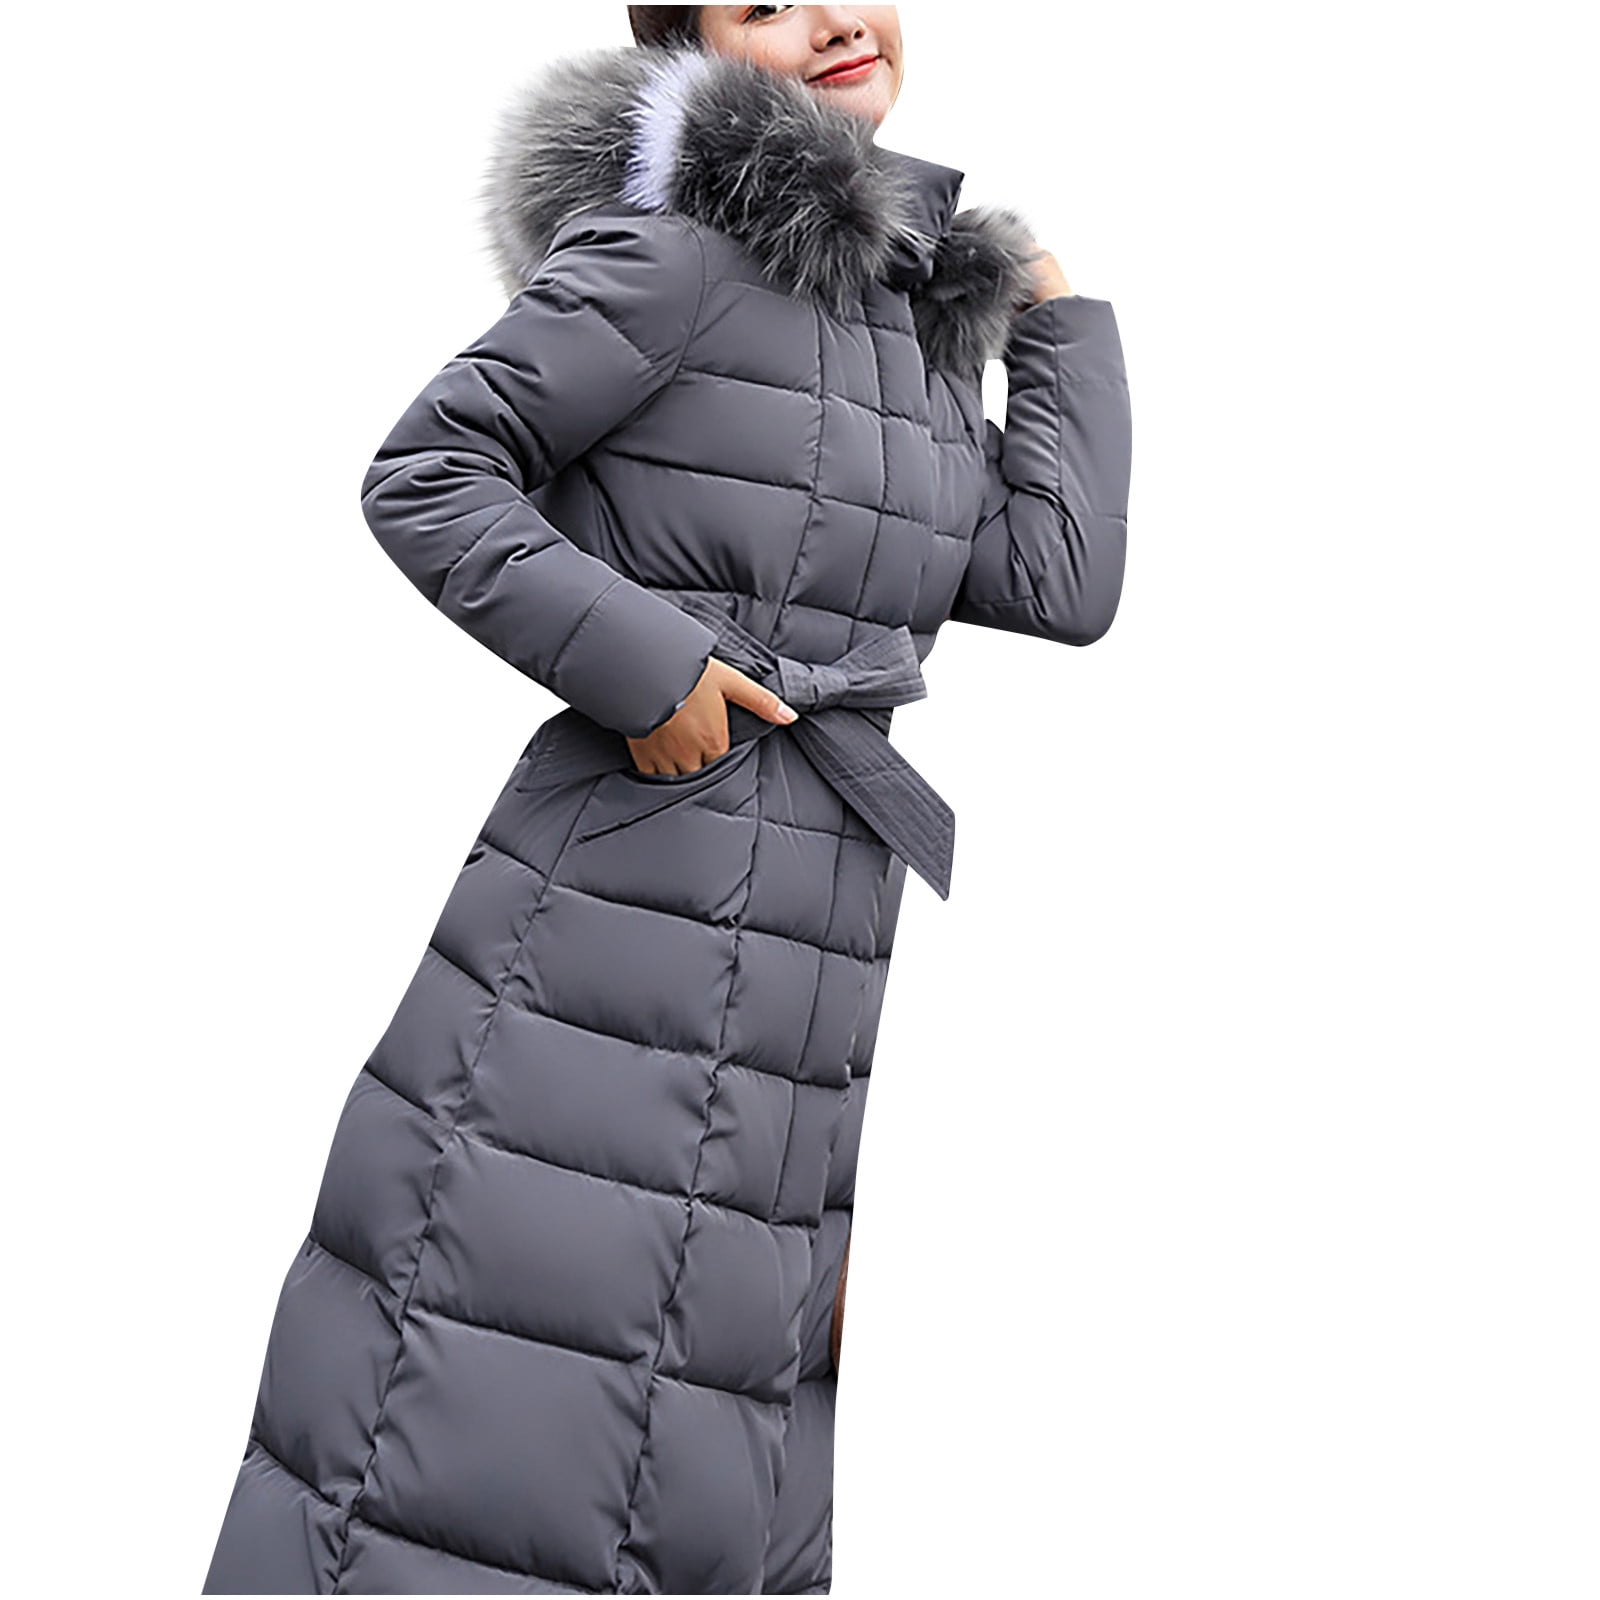 BVnarty Women's Coat Shacket Jacket Casual Rain Pocket Swing Jacket Winter Fashion Top Plus Size Solid Patchwork Polka Dots Hooded Neck Lightweight